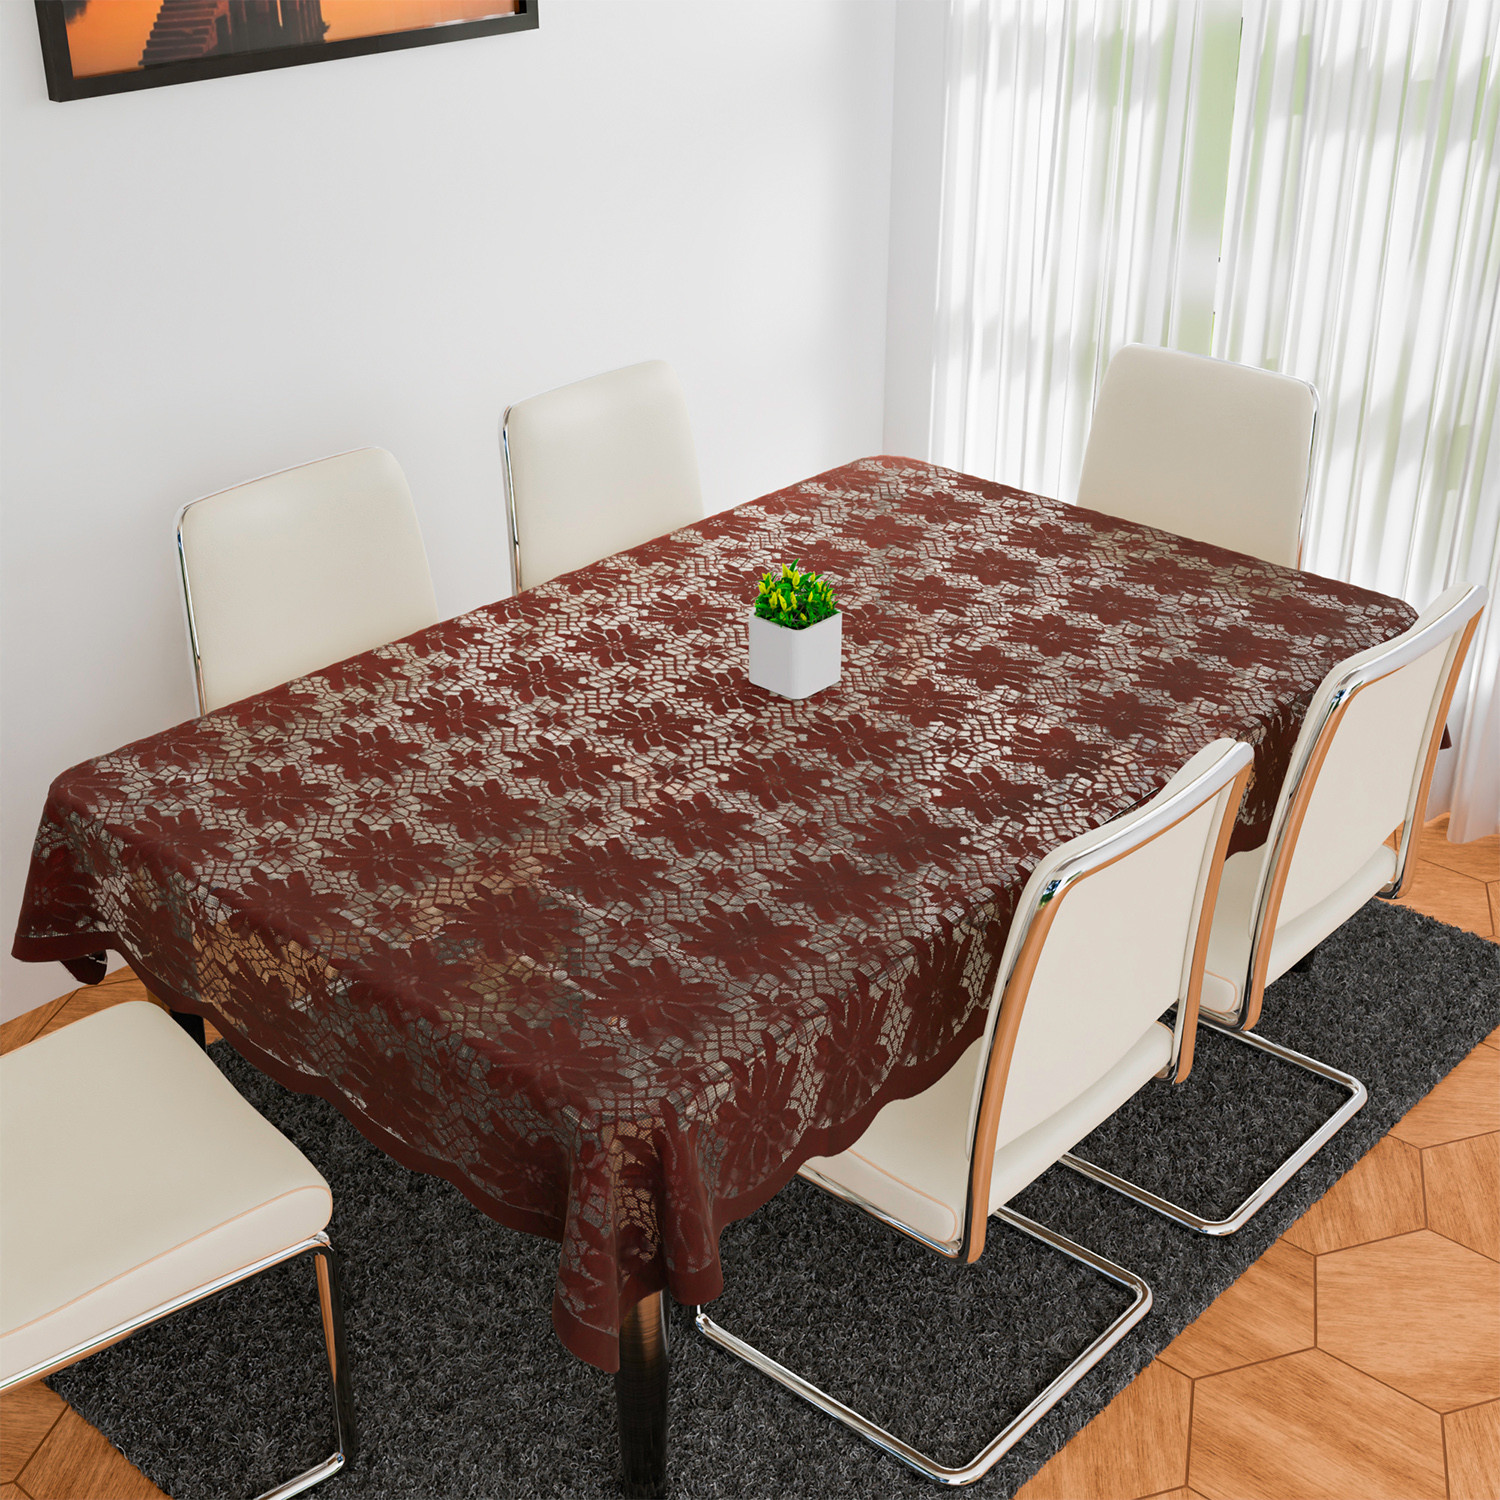 Kuber Industries Dining Table Cover | Cotton Table Cloth Cover | 6-Seater Table Cloth | Plain Jasmin Table Cover | Table Protector | Table Cover for Dining Table | 60x90 Inch | DTC | Maroon